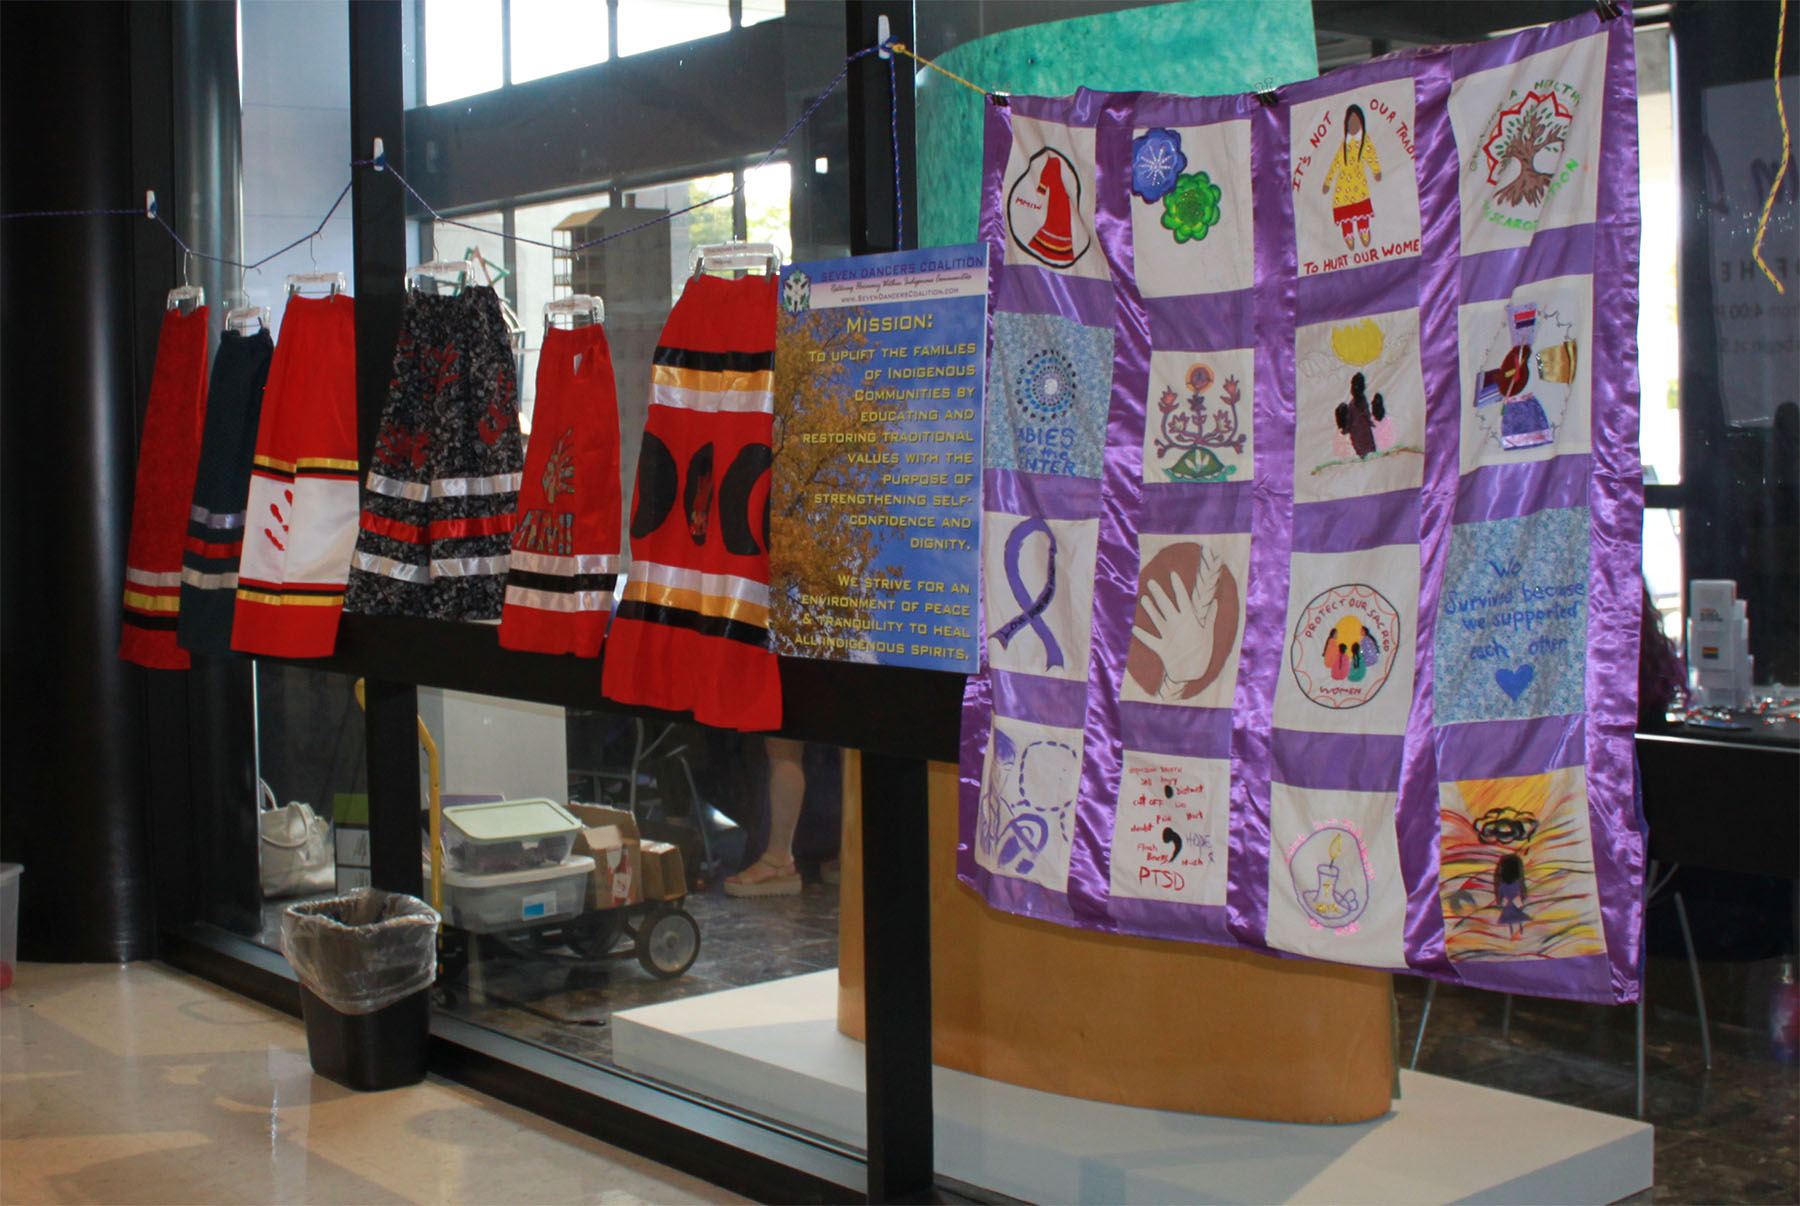 A recent NU event showcased ribbon skirts designed and created by members of the six nations of the Haudenosaunee Confederacy and a 16-square quilt made by women in the Tuscarora community.